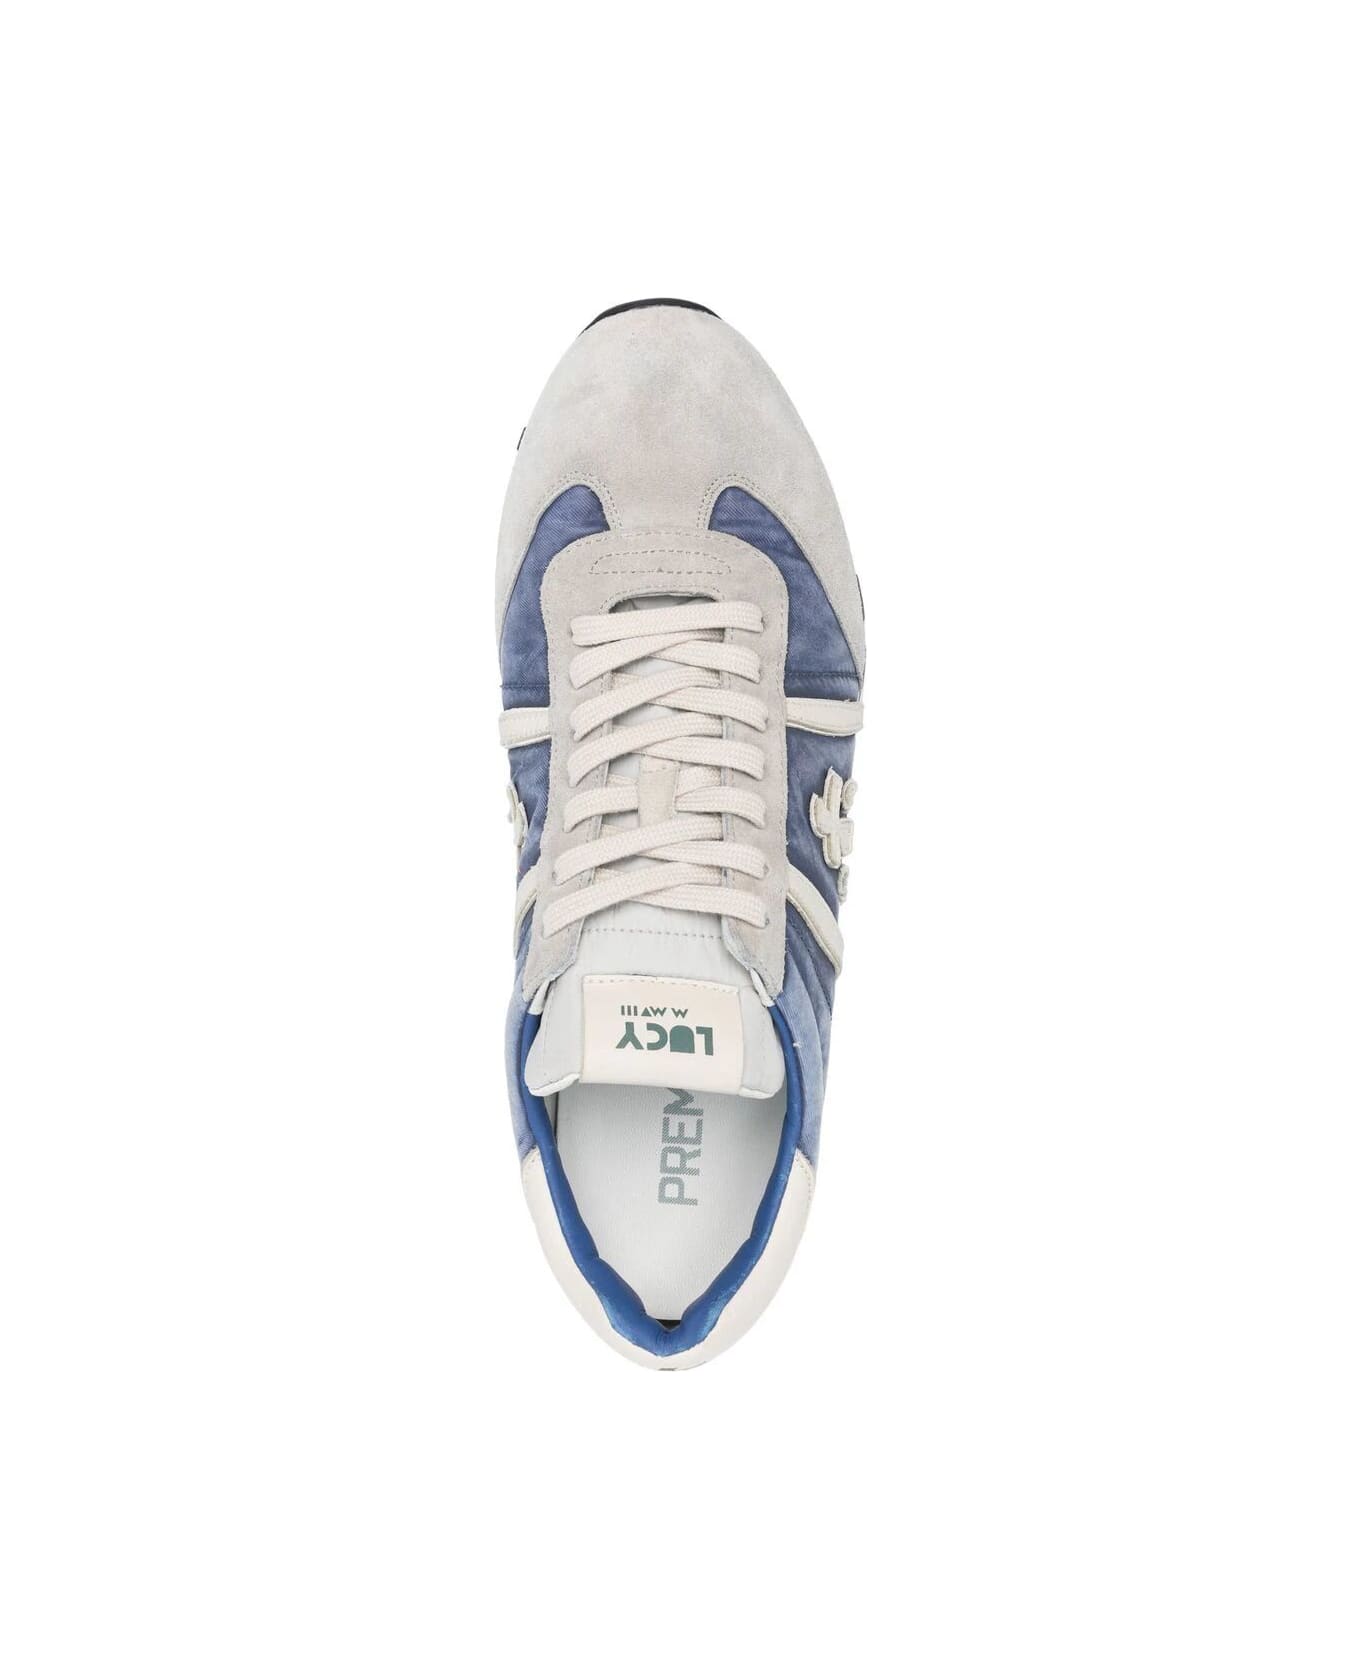 Premiata Lucy Sneakers - Blue スニーカー